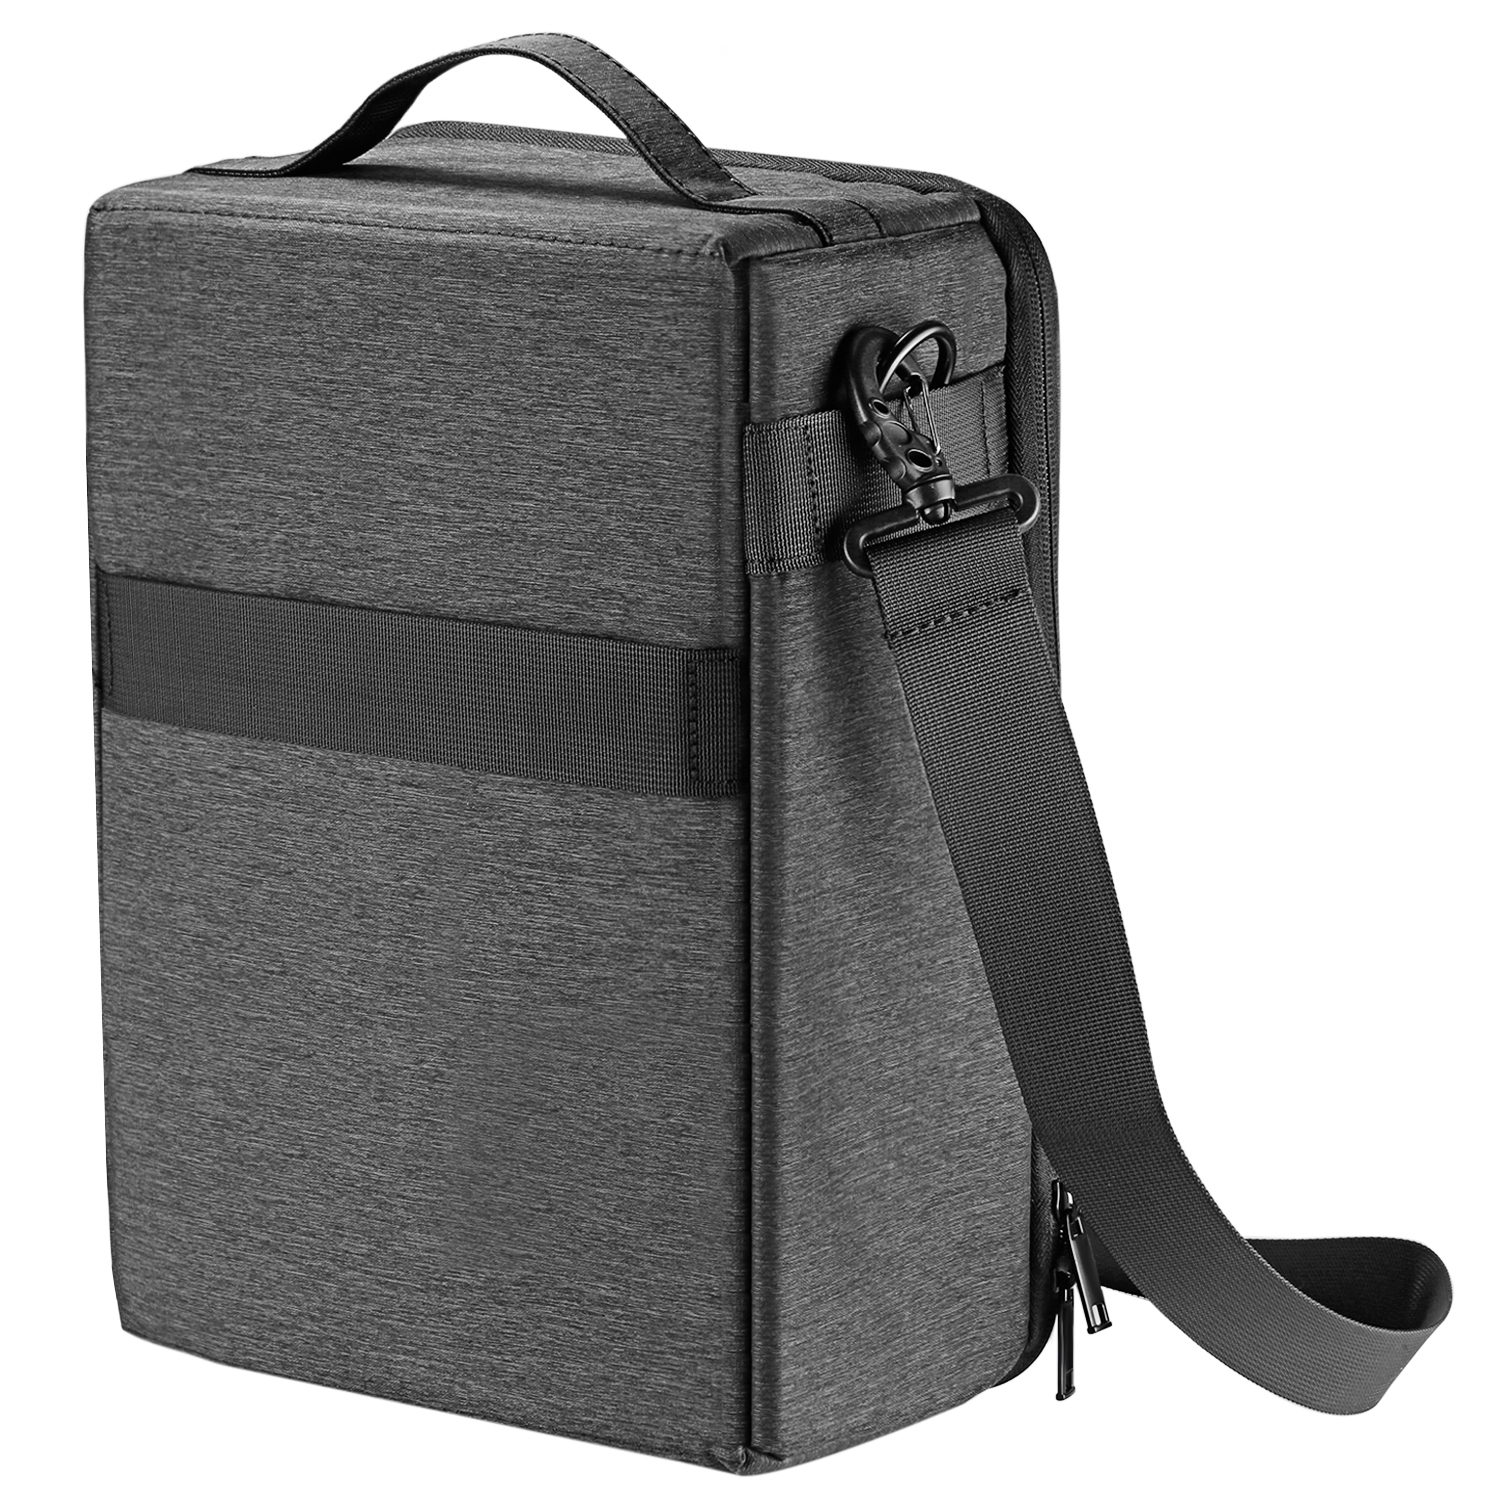 Neewer NW140S Waterproof Camera and Lens Storage Carrying